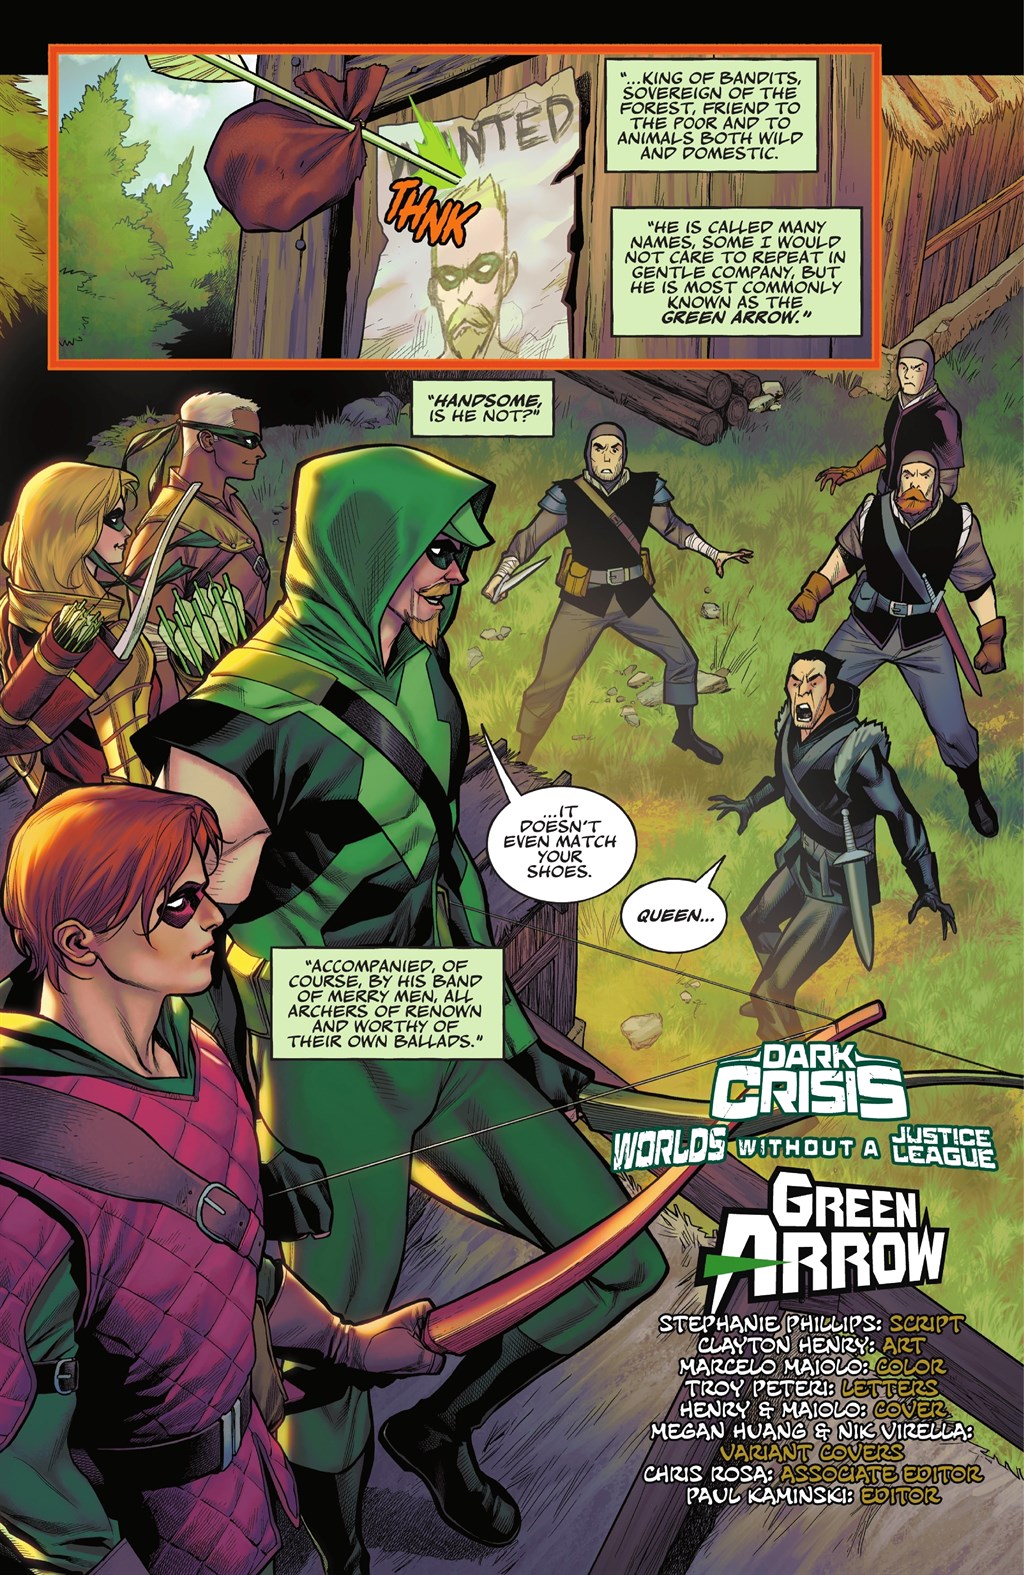 Read online Dark Crisis: Worlds Without a Justice League comic -  Issue # TPB (Part 2) - 3